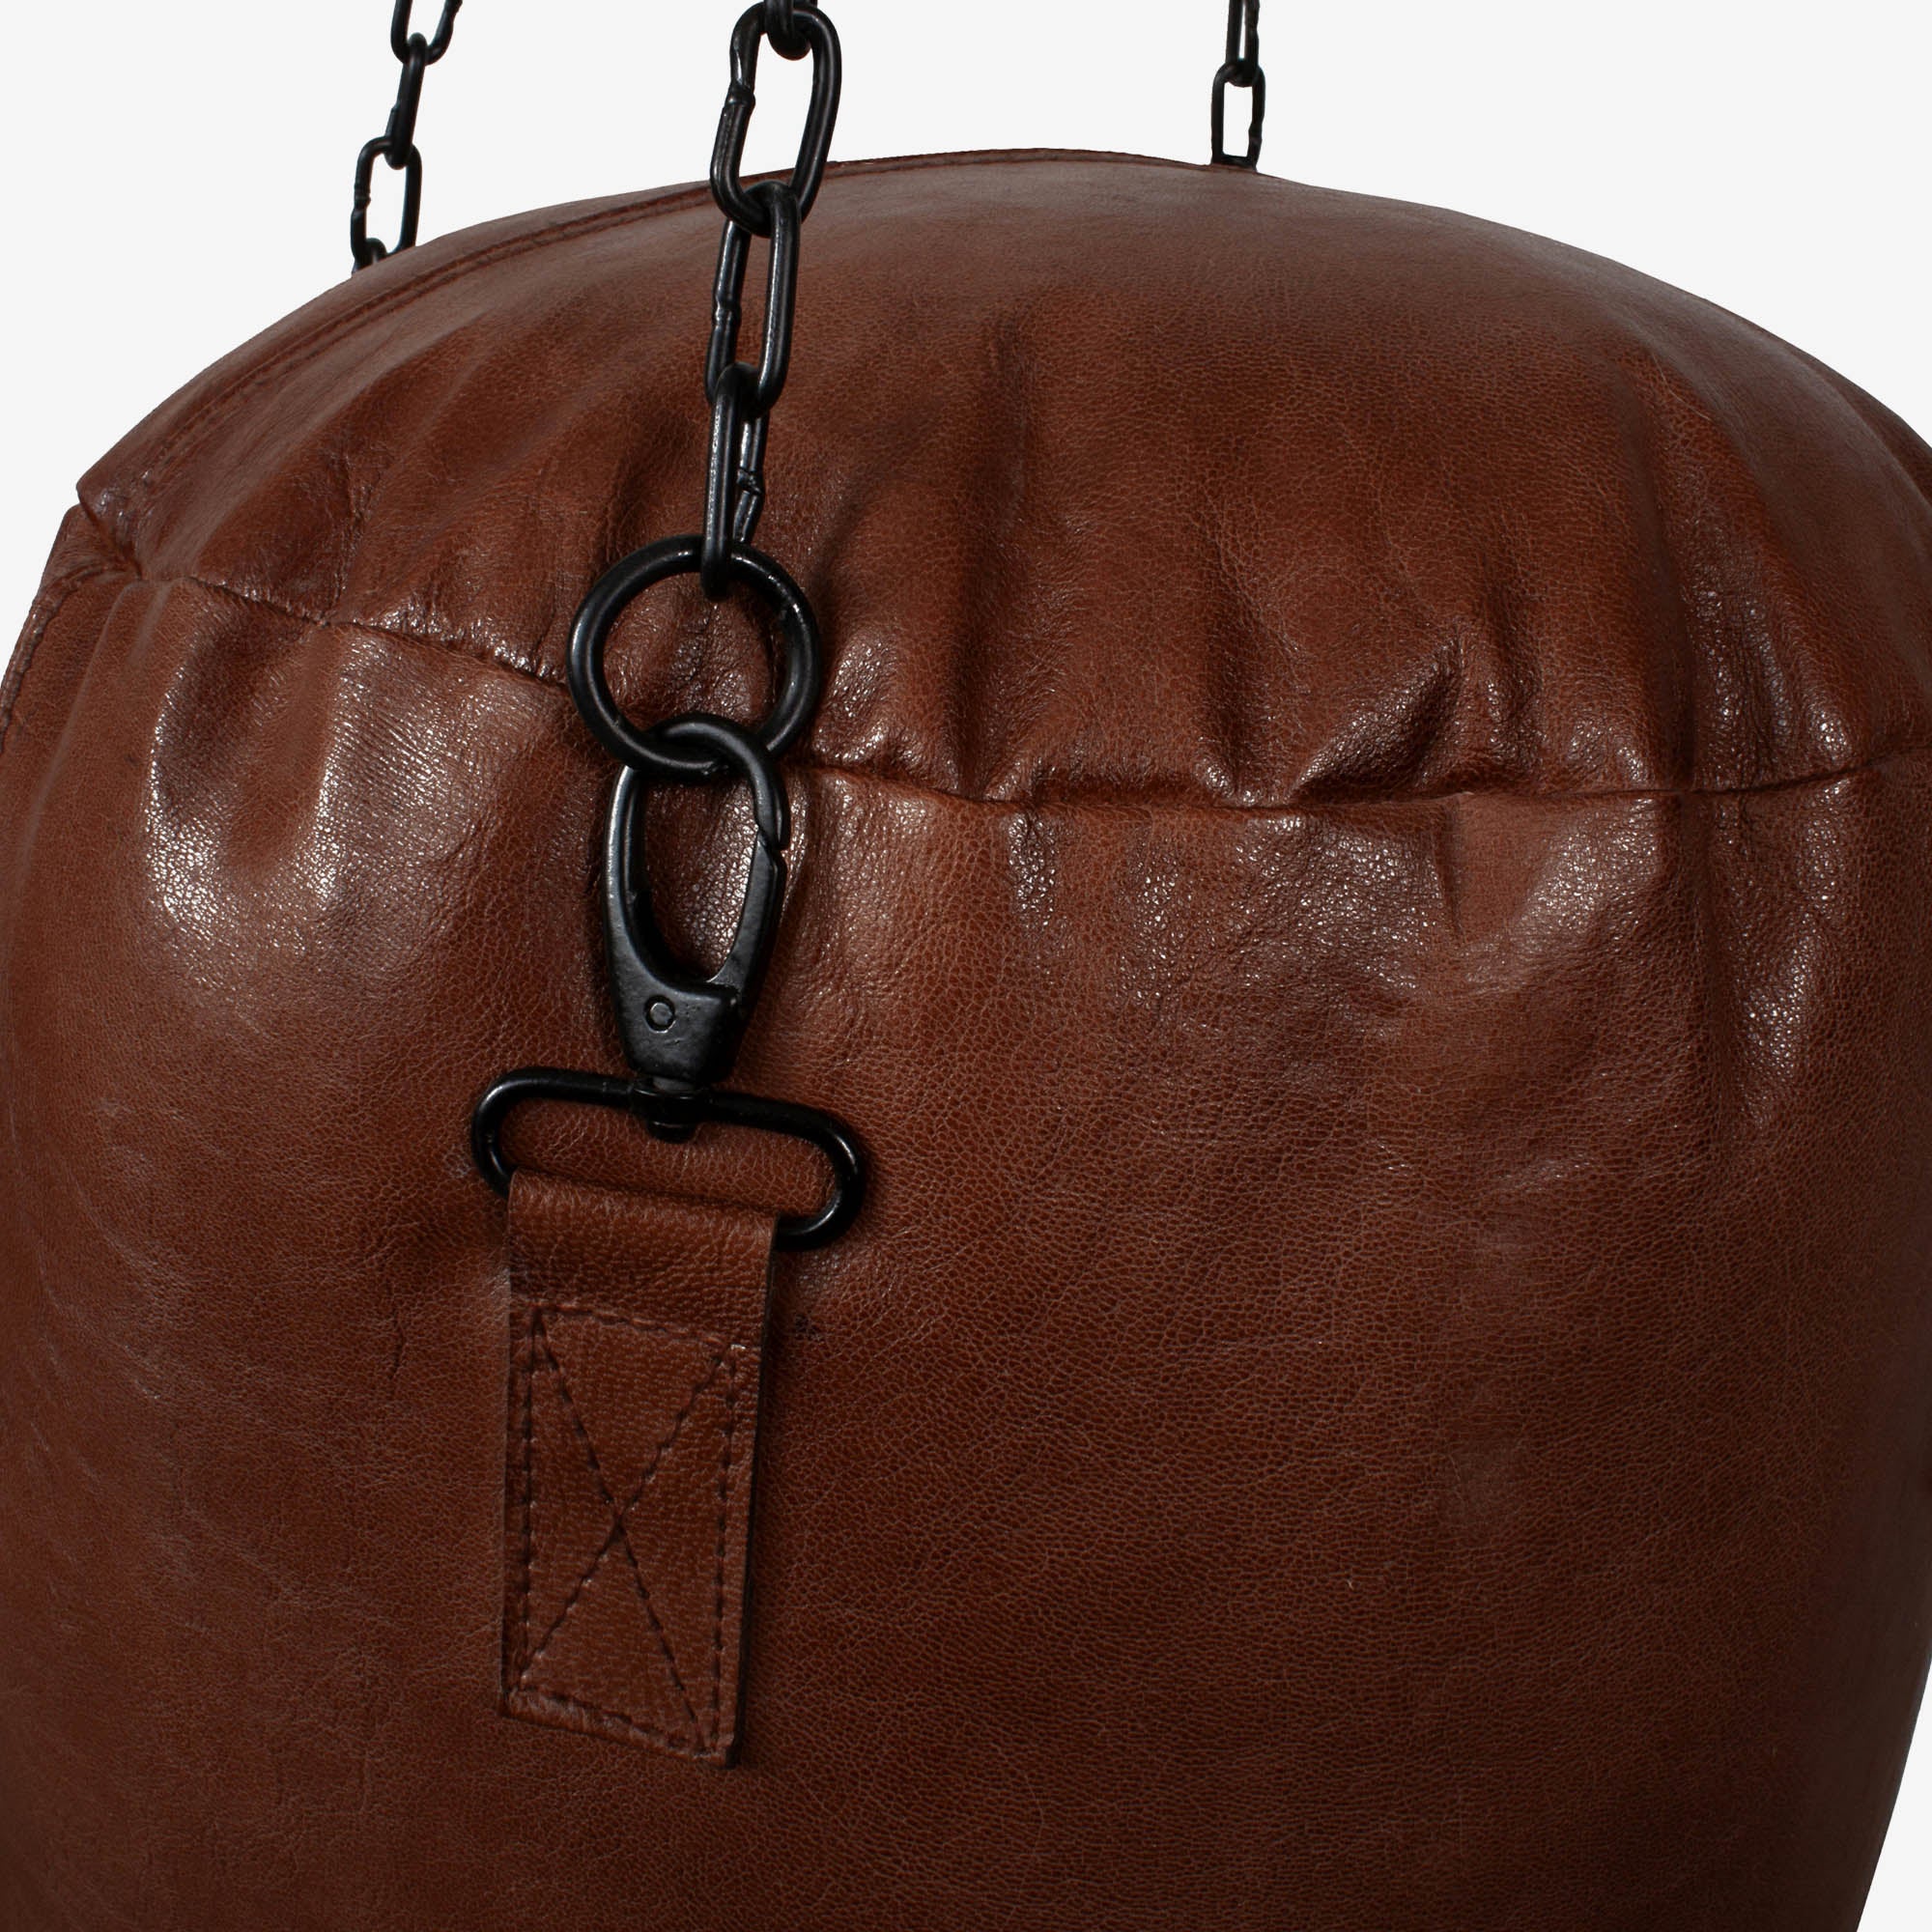 Leater punching bag small – small h39xdsn.21cm